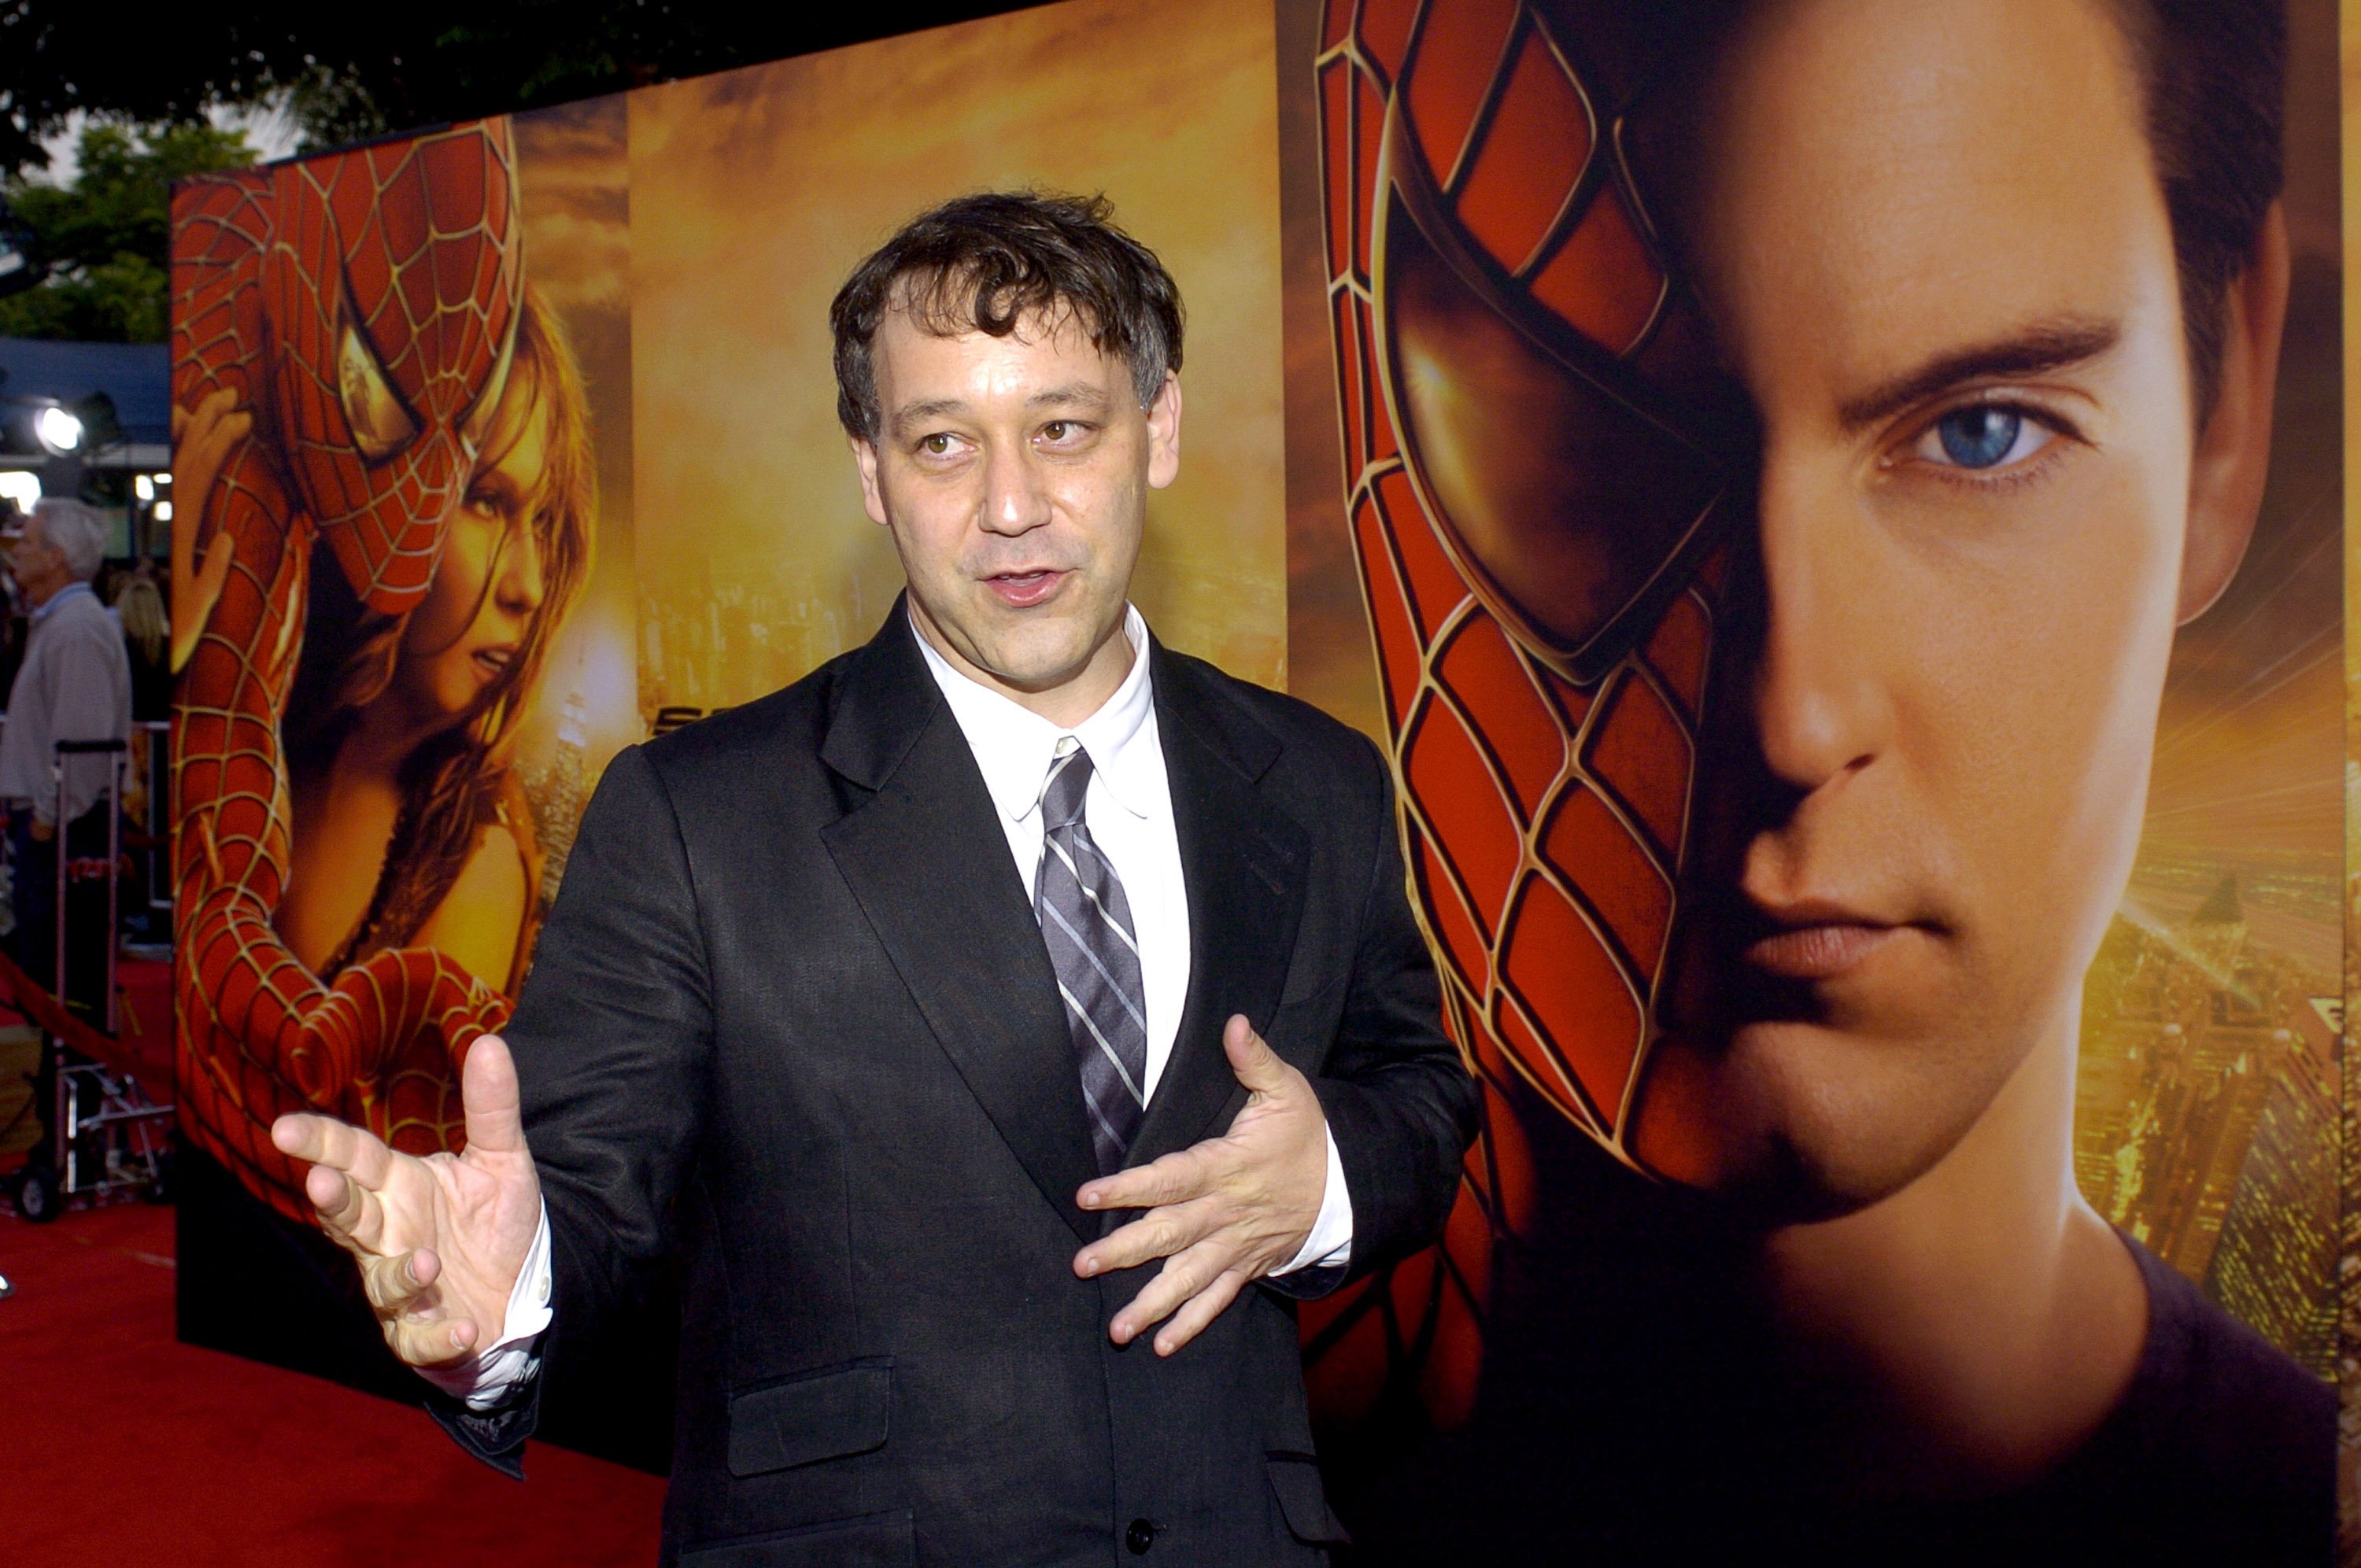 'Doctor Strange in the Multiverse of Madness' director Sam Raimi wears a black suit coat, white button-up shirt, and gray and white striped tie.